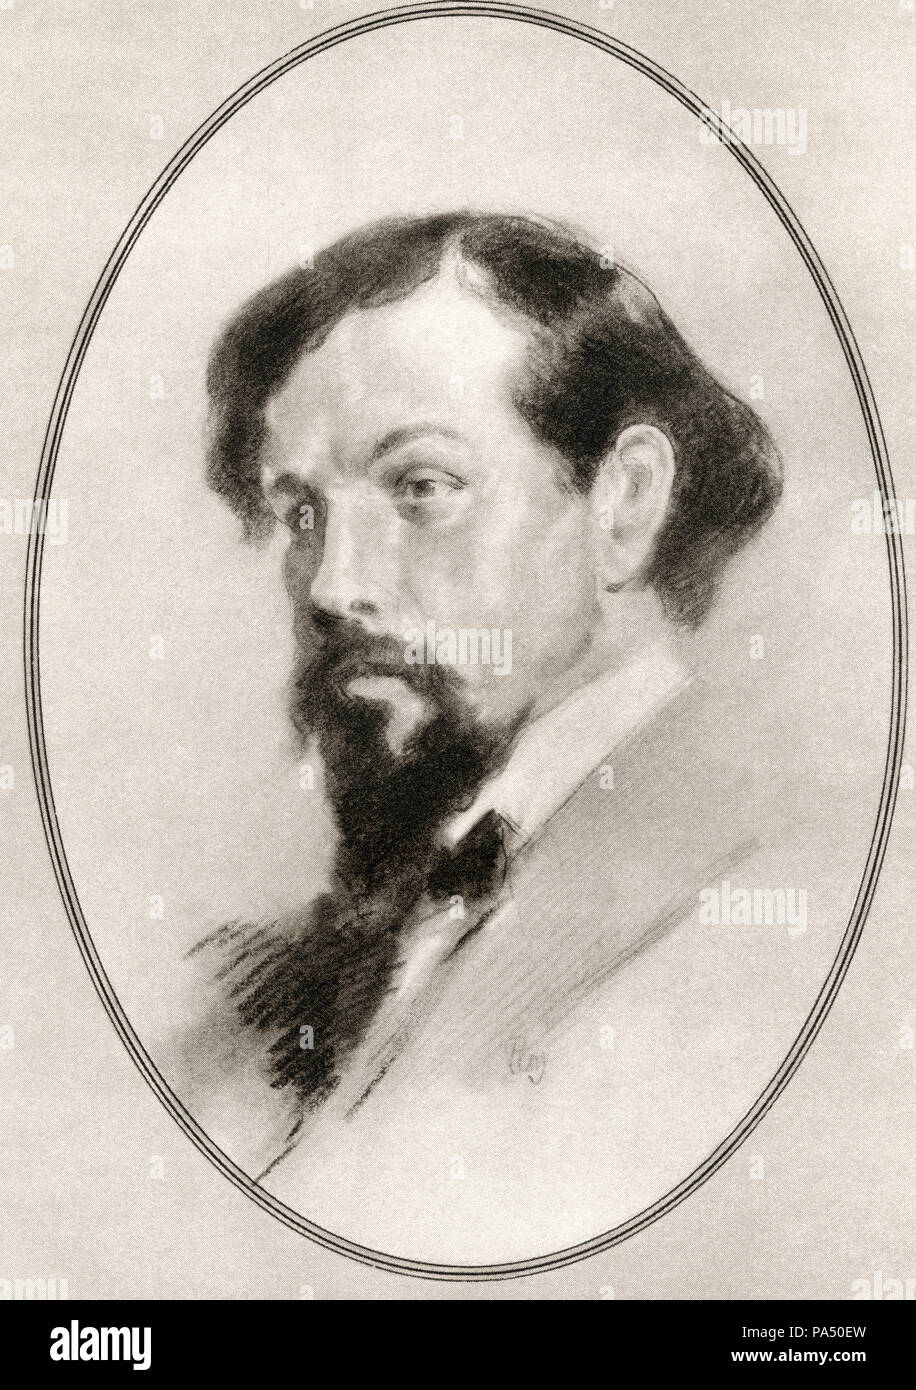 Achille-Claude Debussy, 1862 – 1918.  French composer.  Illustration by Gordon Ross, American artist and illustrator (1873-1946), from Living Biographies of Great Composers. Stock Photo